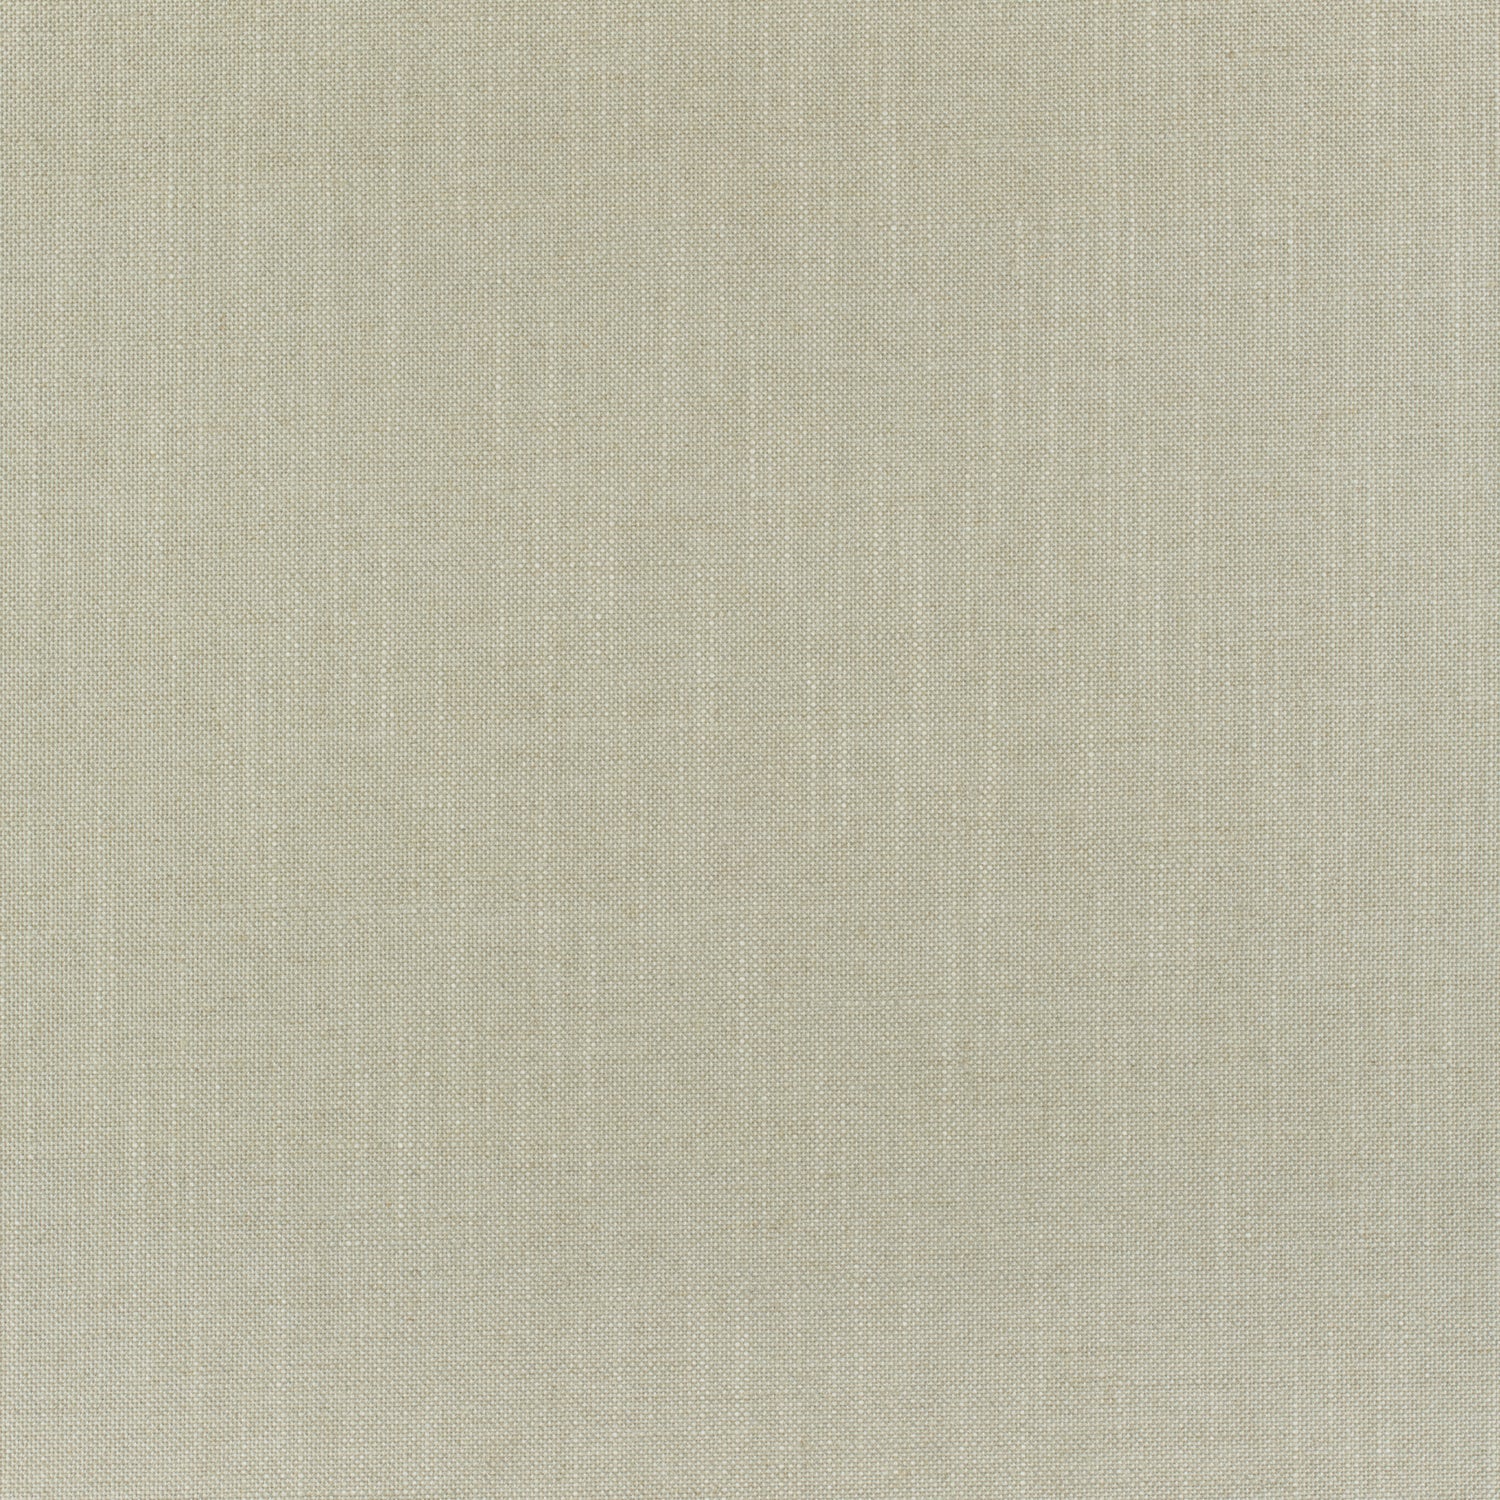 Lira fabric in linen color - pattern number W80464 - by Thibaut in the Mosaic collection